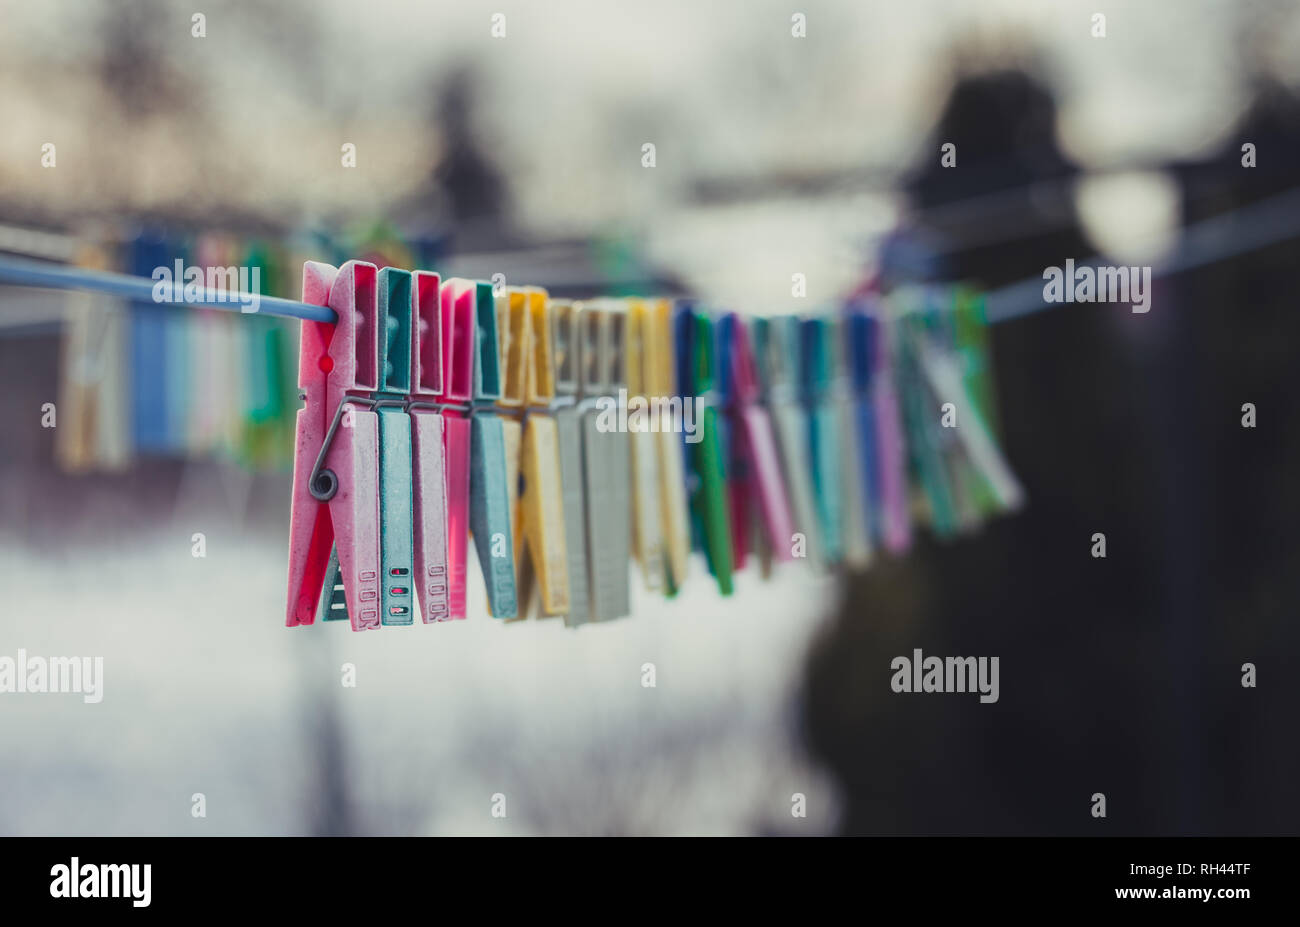 Beautiful colorful clothes pegs on the washing line with snow on background in winter. Stock Photo